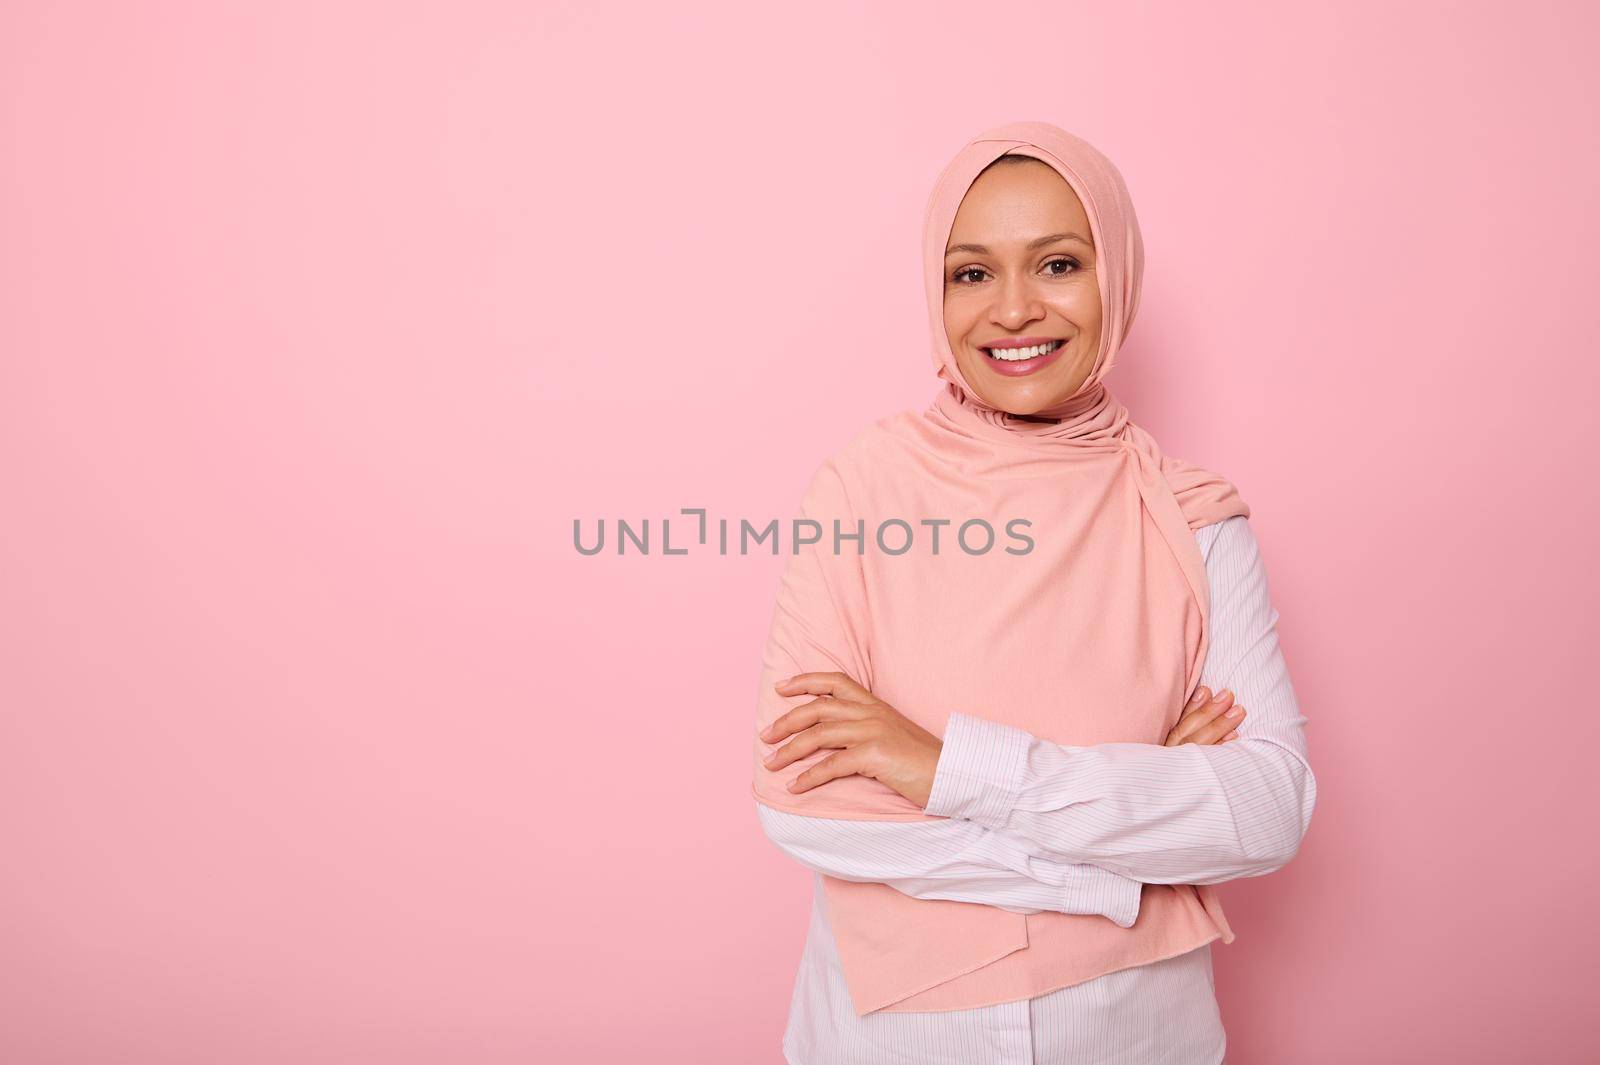 Arab Muslim woman wearing a hijab crossing arms, smiling with beautiful toothy smile, poses on pink background with copy space looking at camera. Concept of successful confident islamic modern woman by artgf